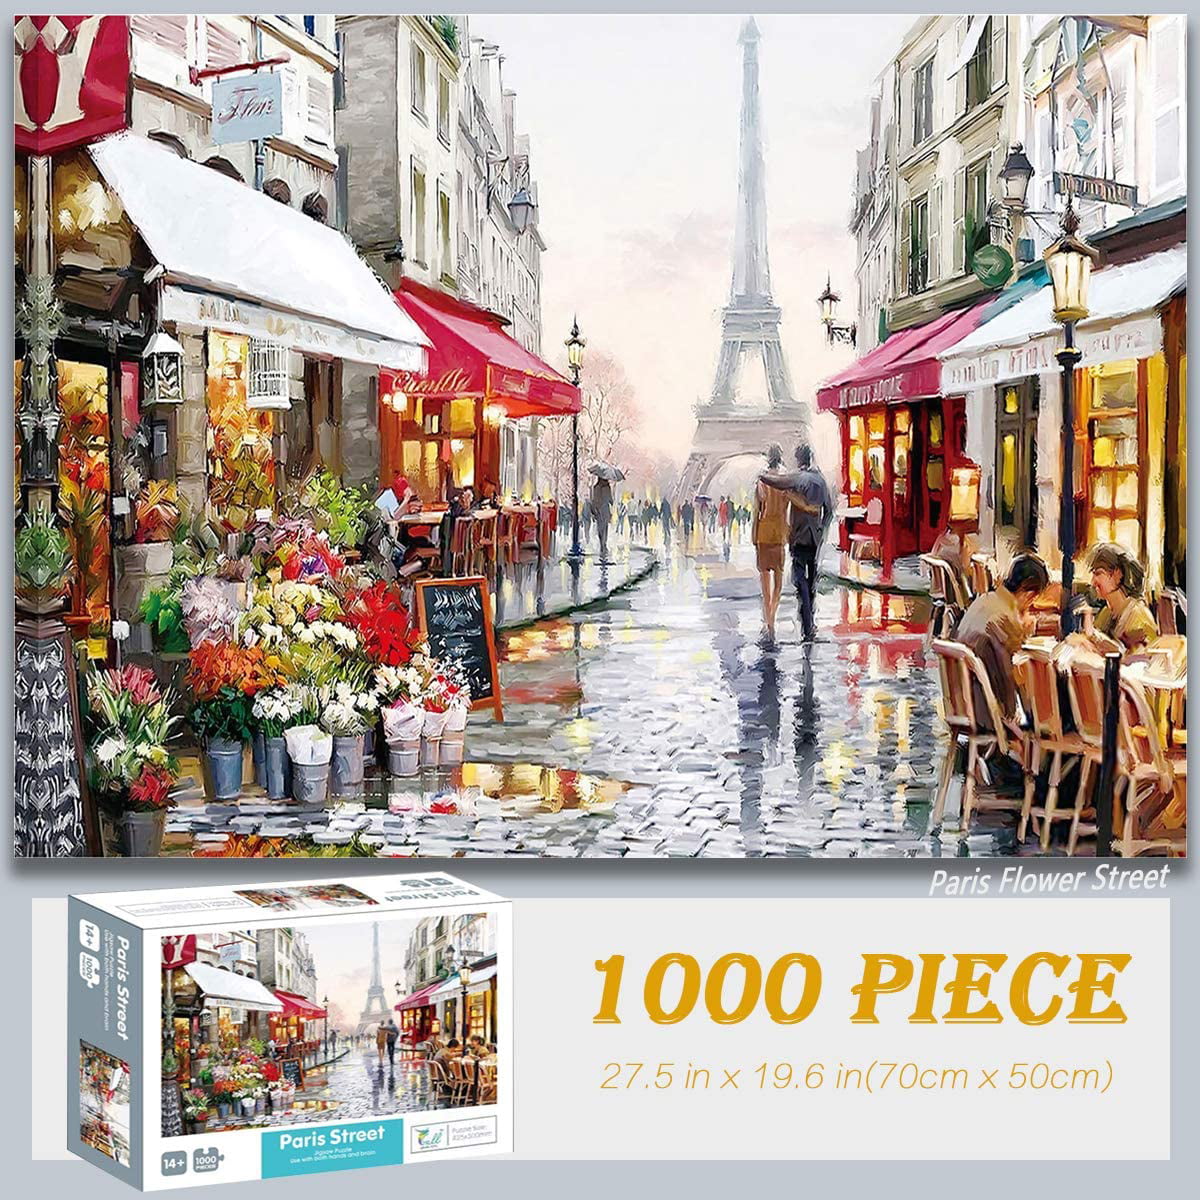 1000 Piece Friends Ross Puzzles for Adults Wooden Jigsaw Puzzles Game Decoration Toys Gift for Fun Hobby Relaxation